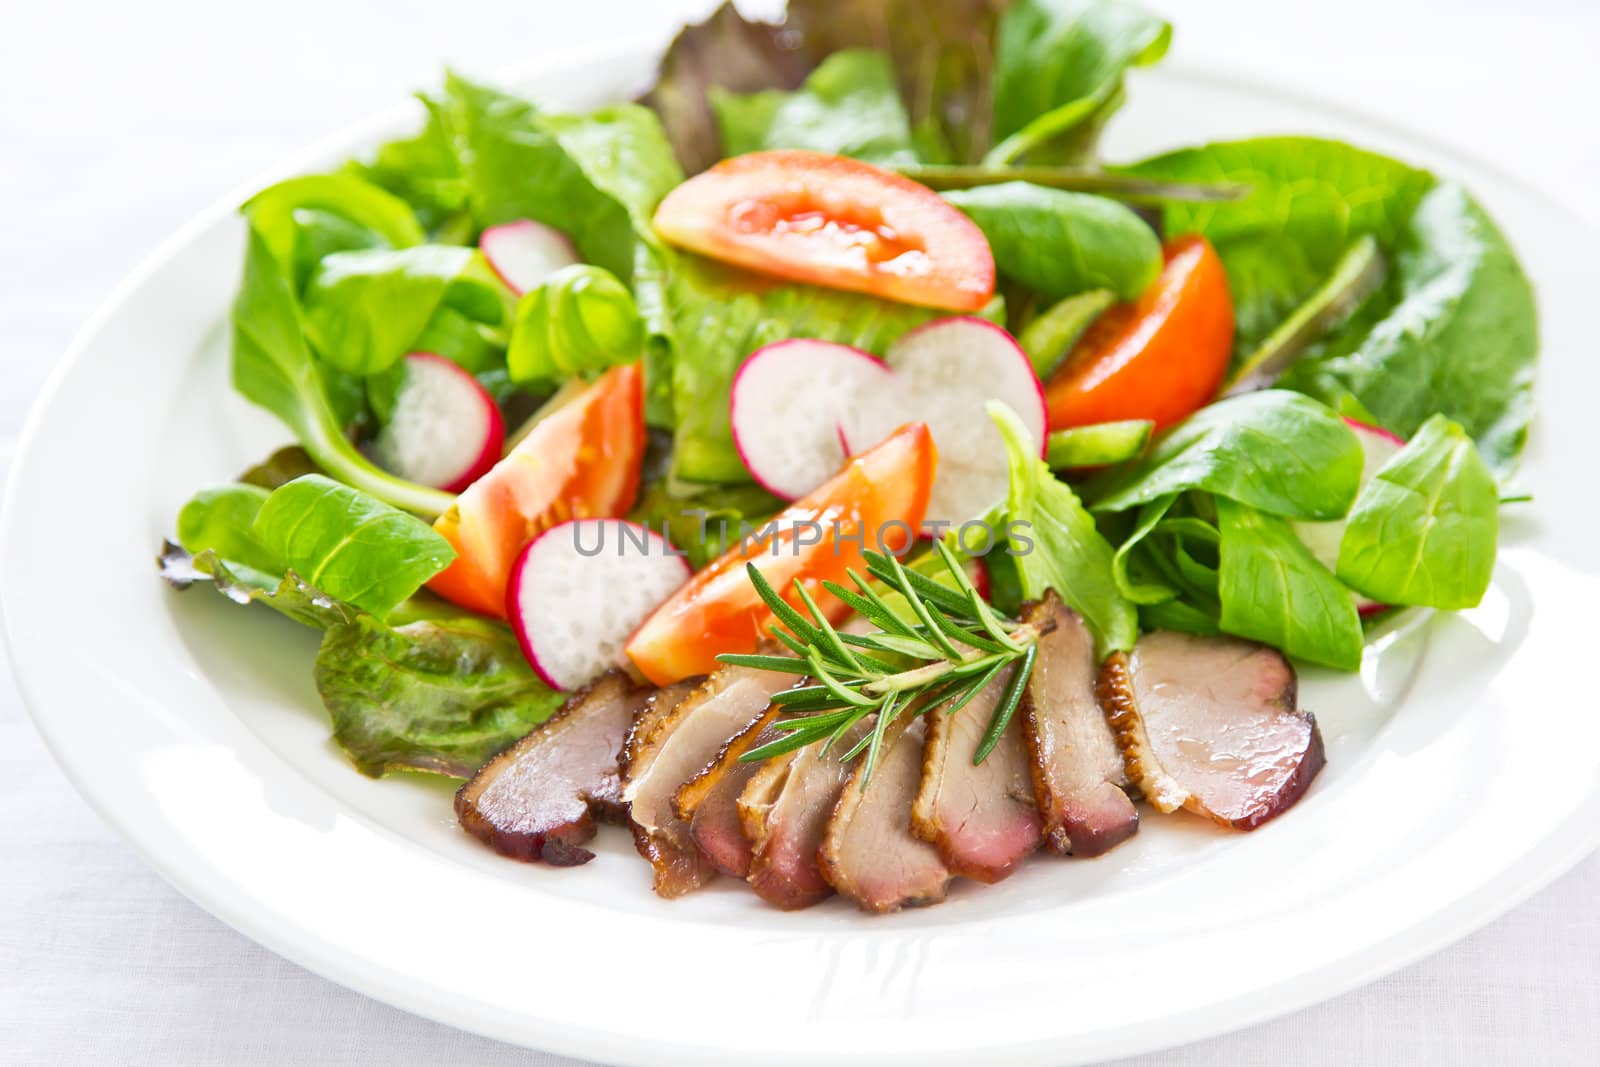 Smoked duck with lettuce,field salad,tomato and rosemary salad